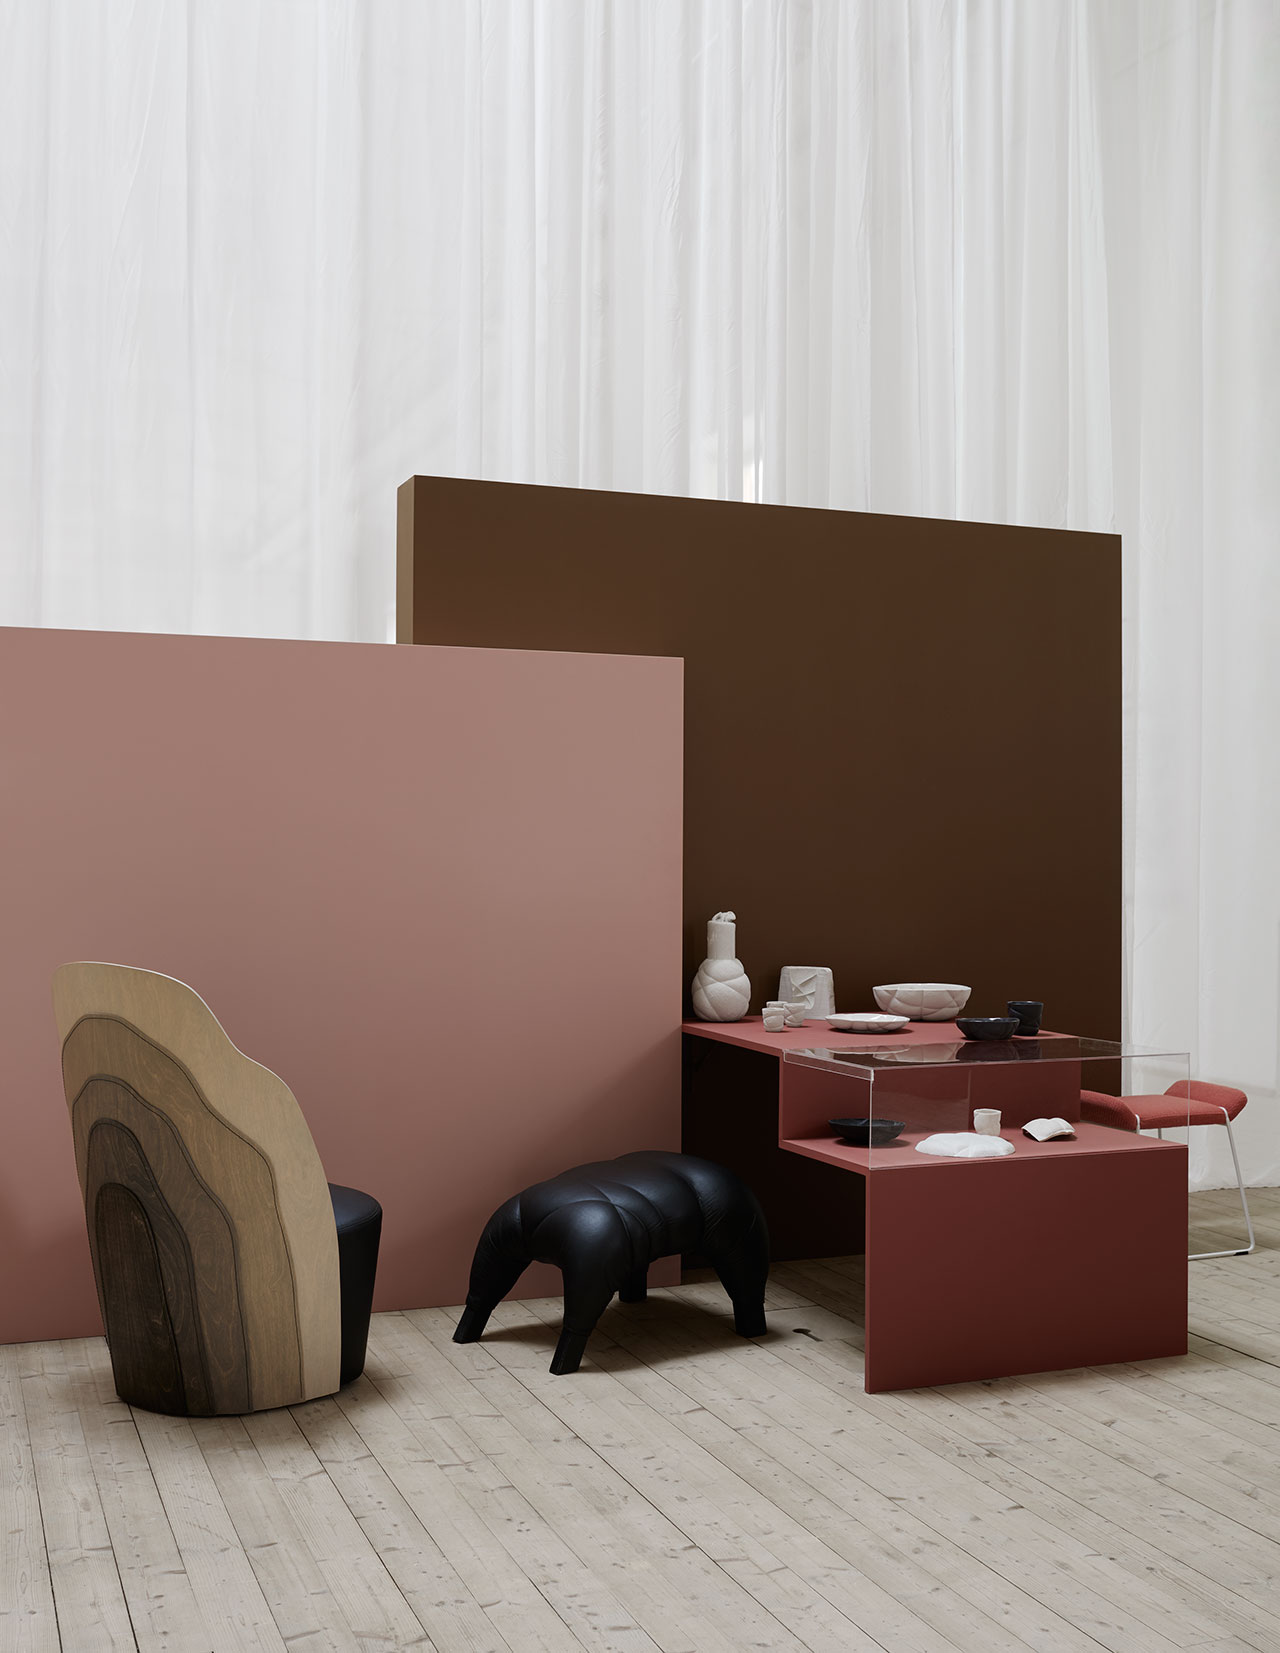 From left, armchair Julius, design Färg &amp; Blanche for Gärsnäs. Video from production at Gärsnäs. Armchair Couture, design Färg &amp; Blanche for BD Barcelona. Stool Succession, Färg &amp; Blanche. Ceramic Succession Ceramic for Petite Friture 2016. On the podium, form for the production of the carafe in felt, the first mold in plaster. Under the glass case, material for the formation of Succession Ceramics. Stool Frankie, design Färg &amp; Blanche for Johanson Design. Photo by Kristofer Johnsson.